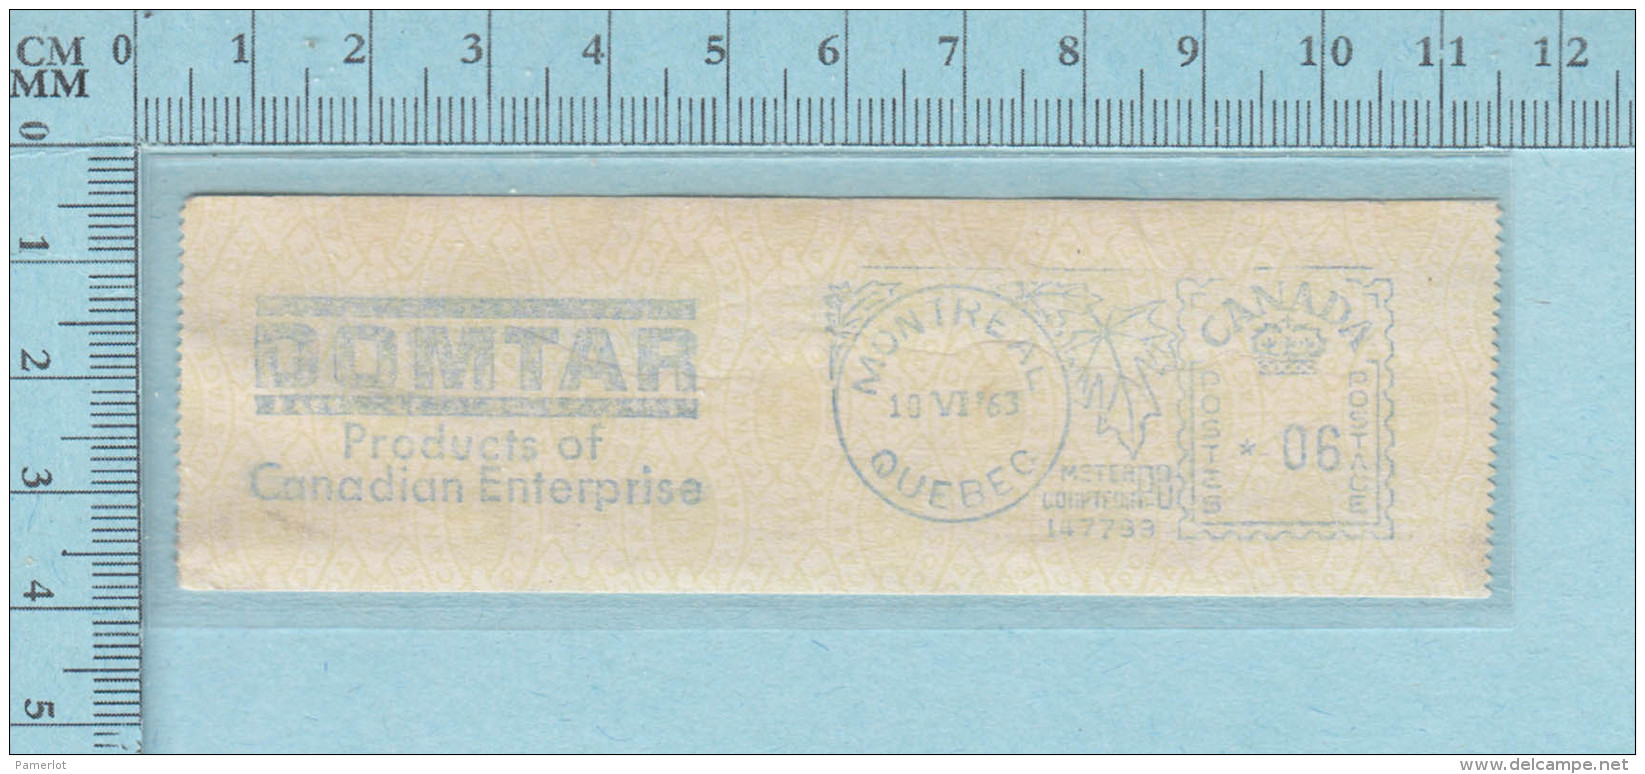 Timbre Canada EMA, Sticker Meter Stamp, 6&cent;, 1963, Domtar Product Is Canadian Entreprise  Pulp &amp; Paper - Oblitérés